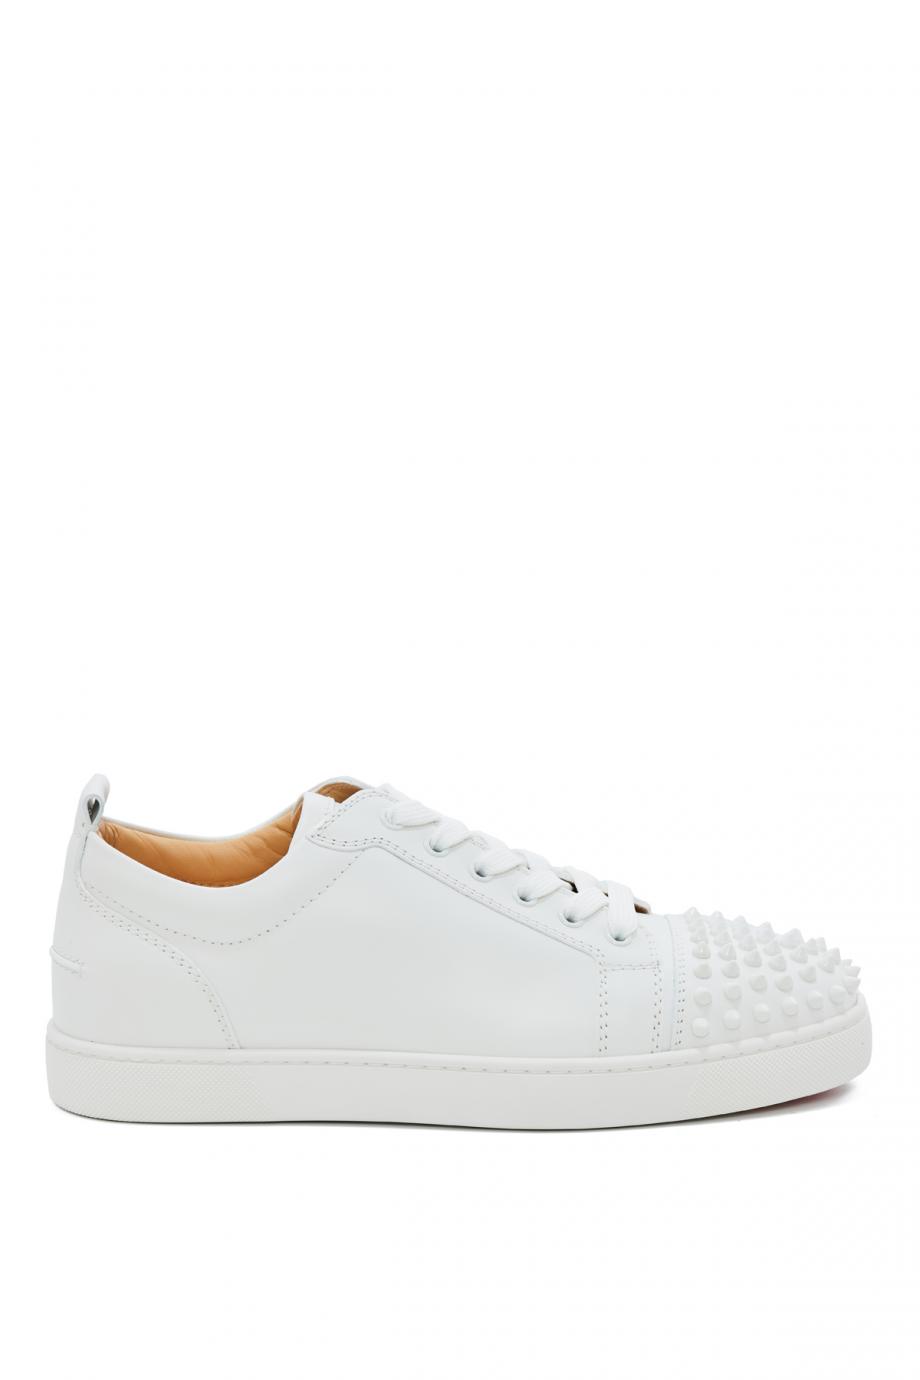 Louis Junior spiked leather sneakers 